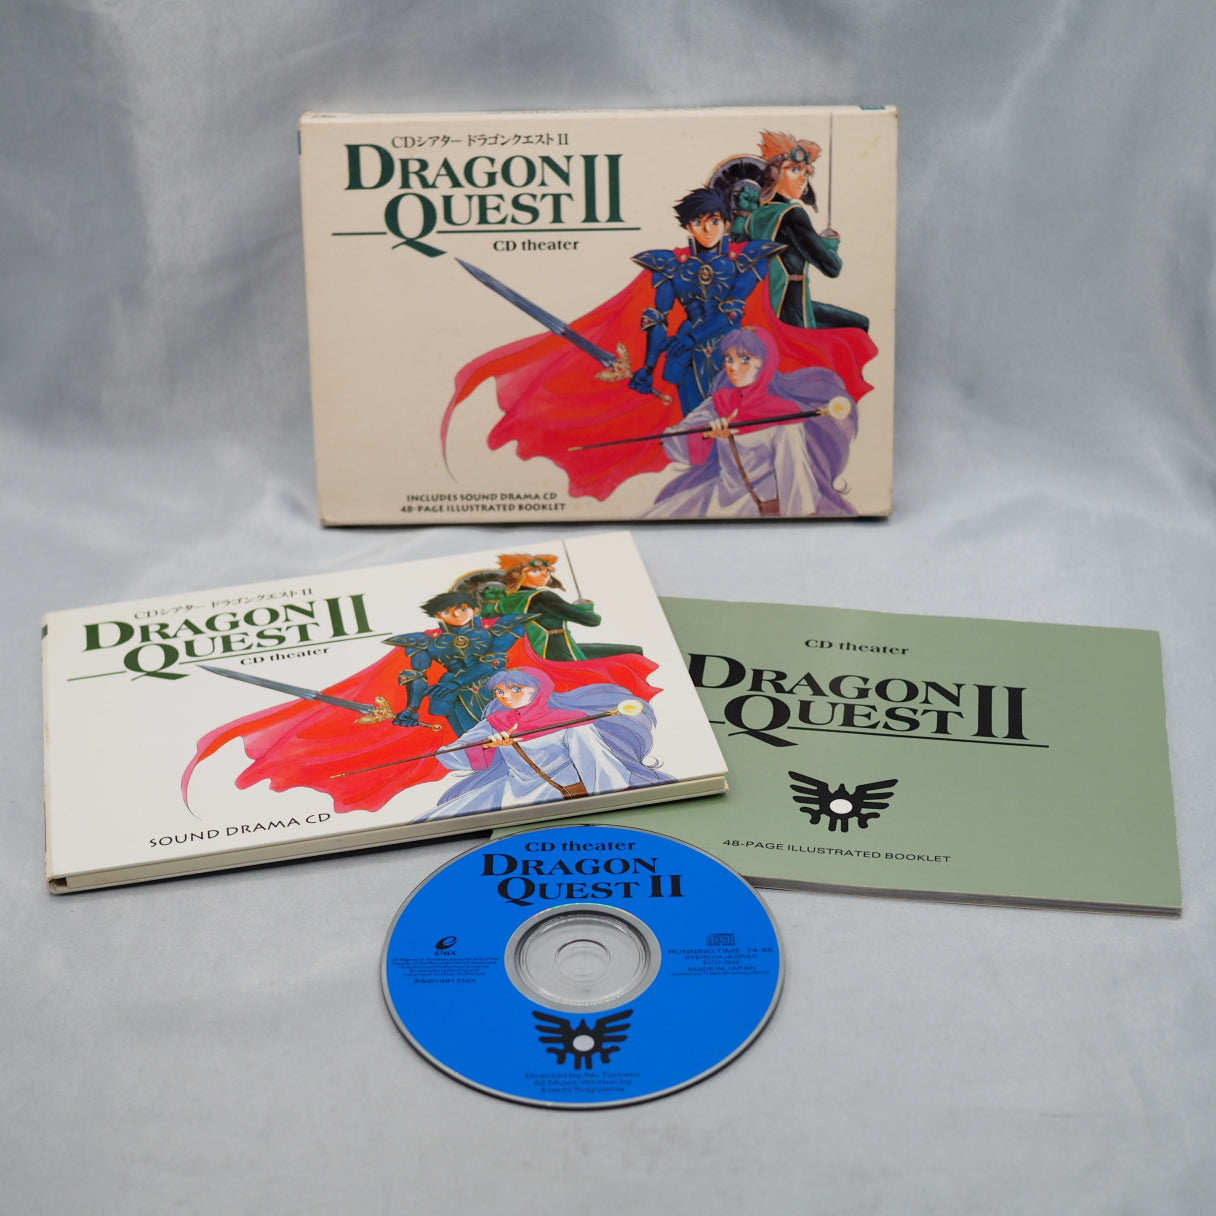 CD theater Dragon Quest 2 [Sound Drama CD + Illustrated Booklet]